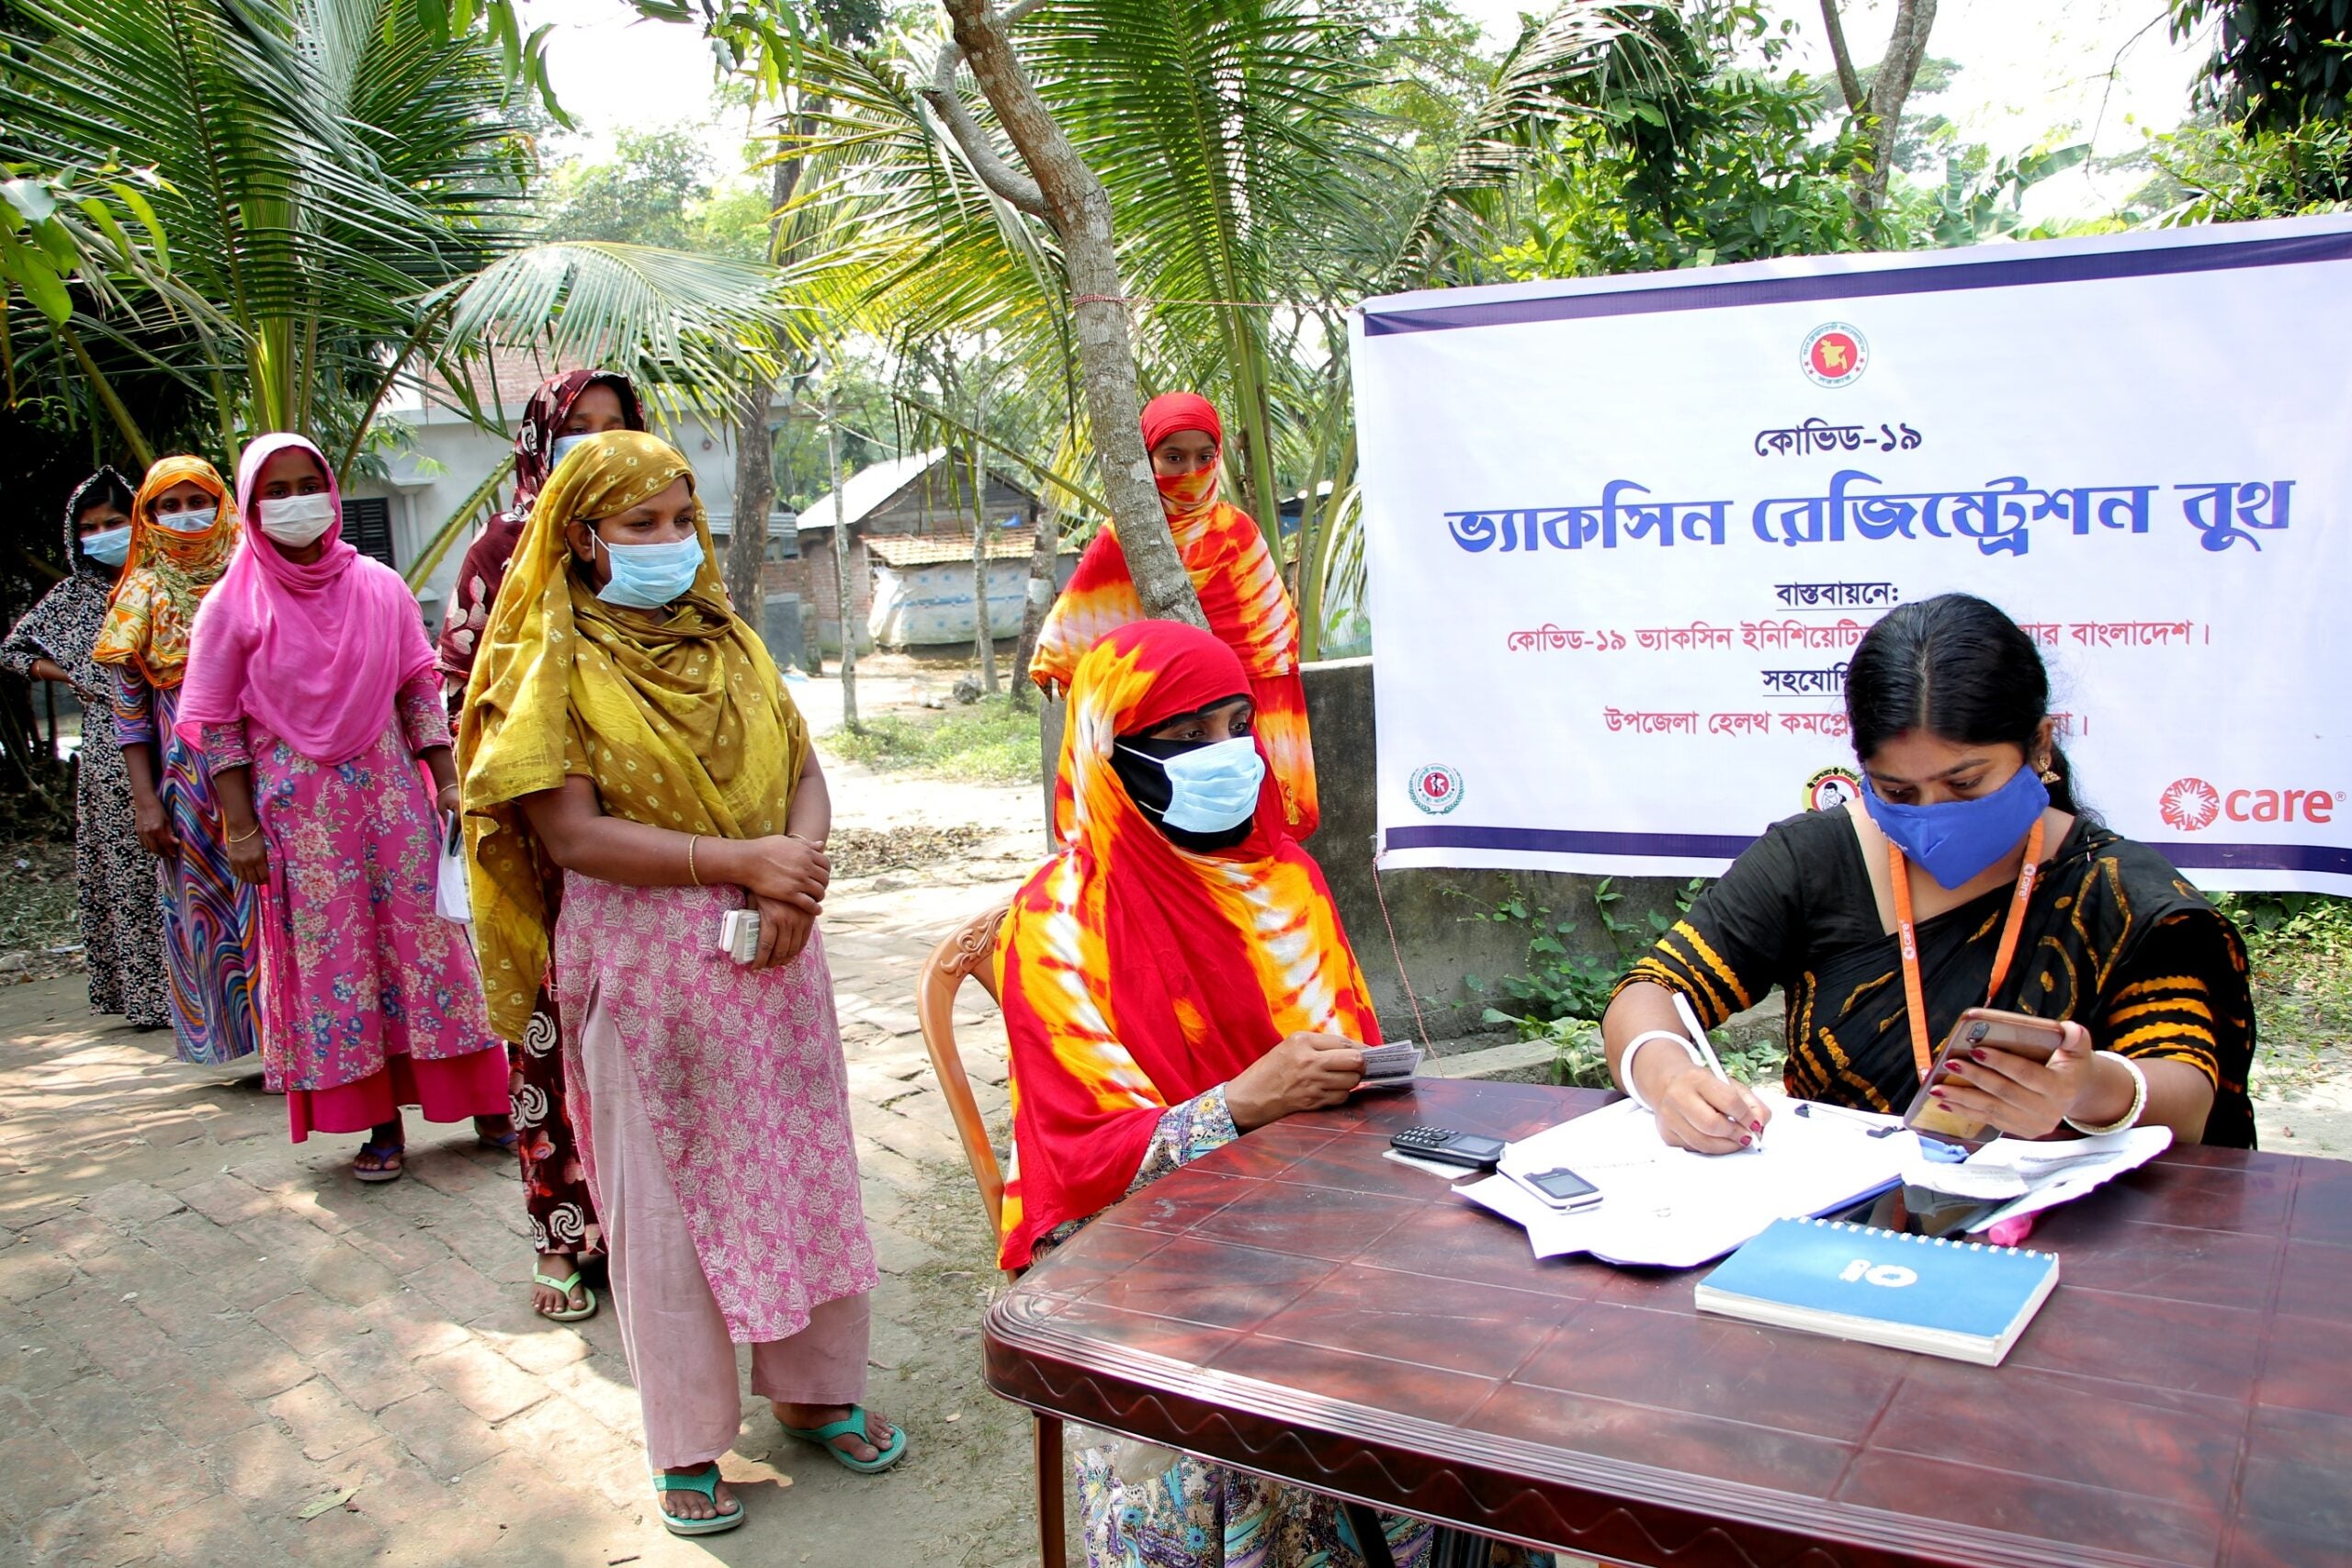 Women wait in line to get vaccinated against COVID-19 in Bangladesh